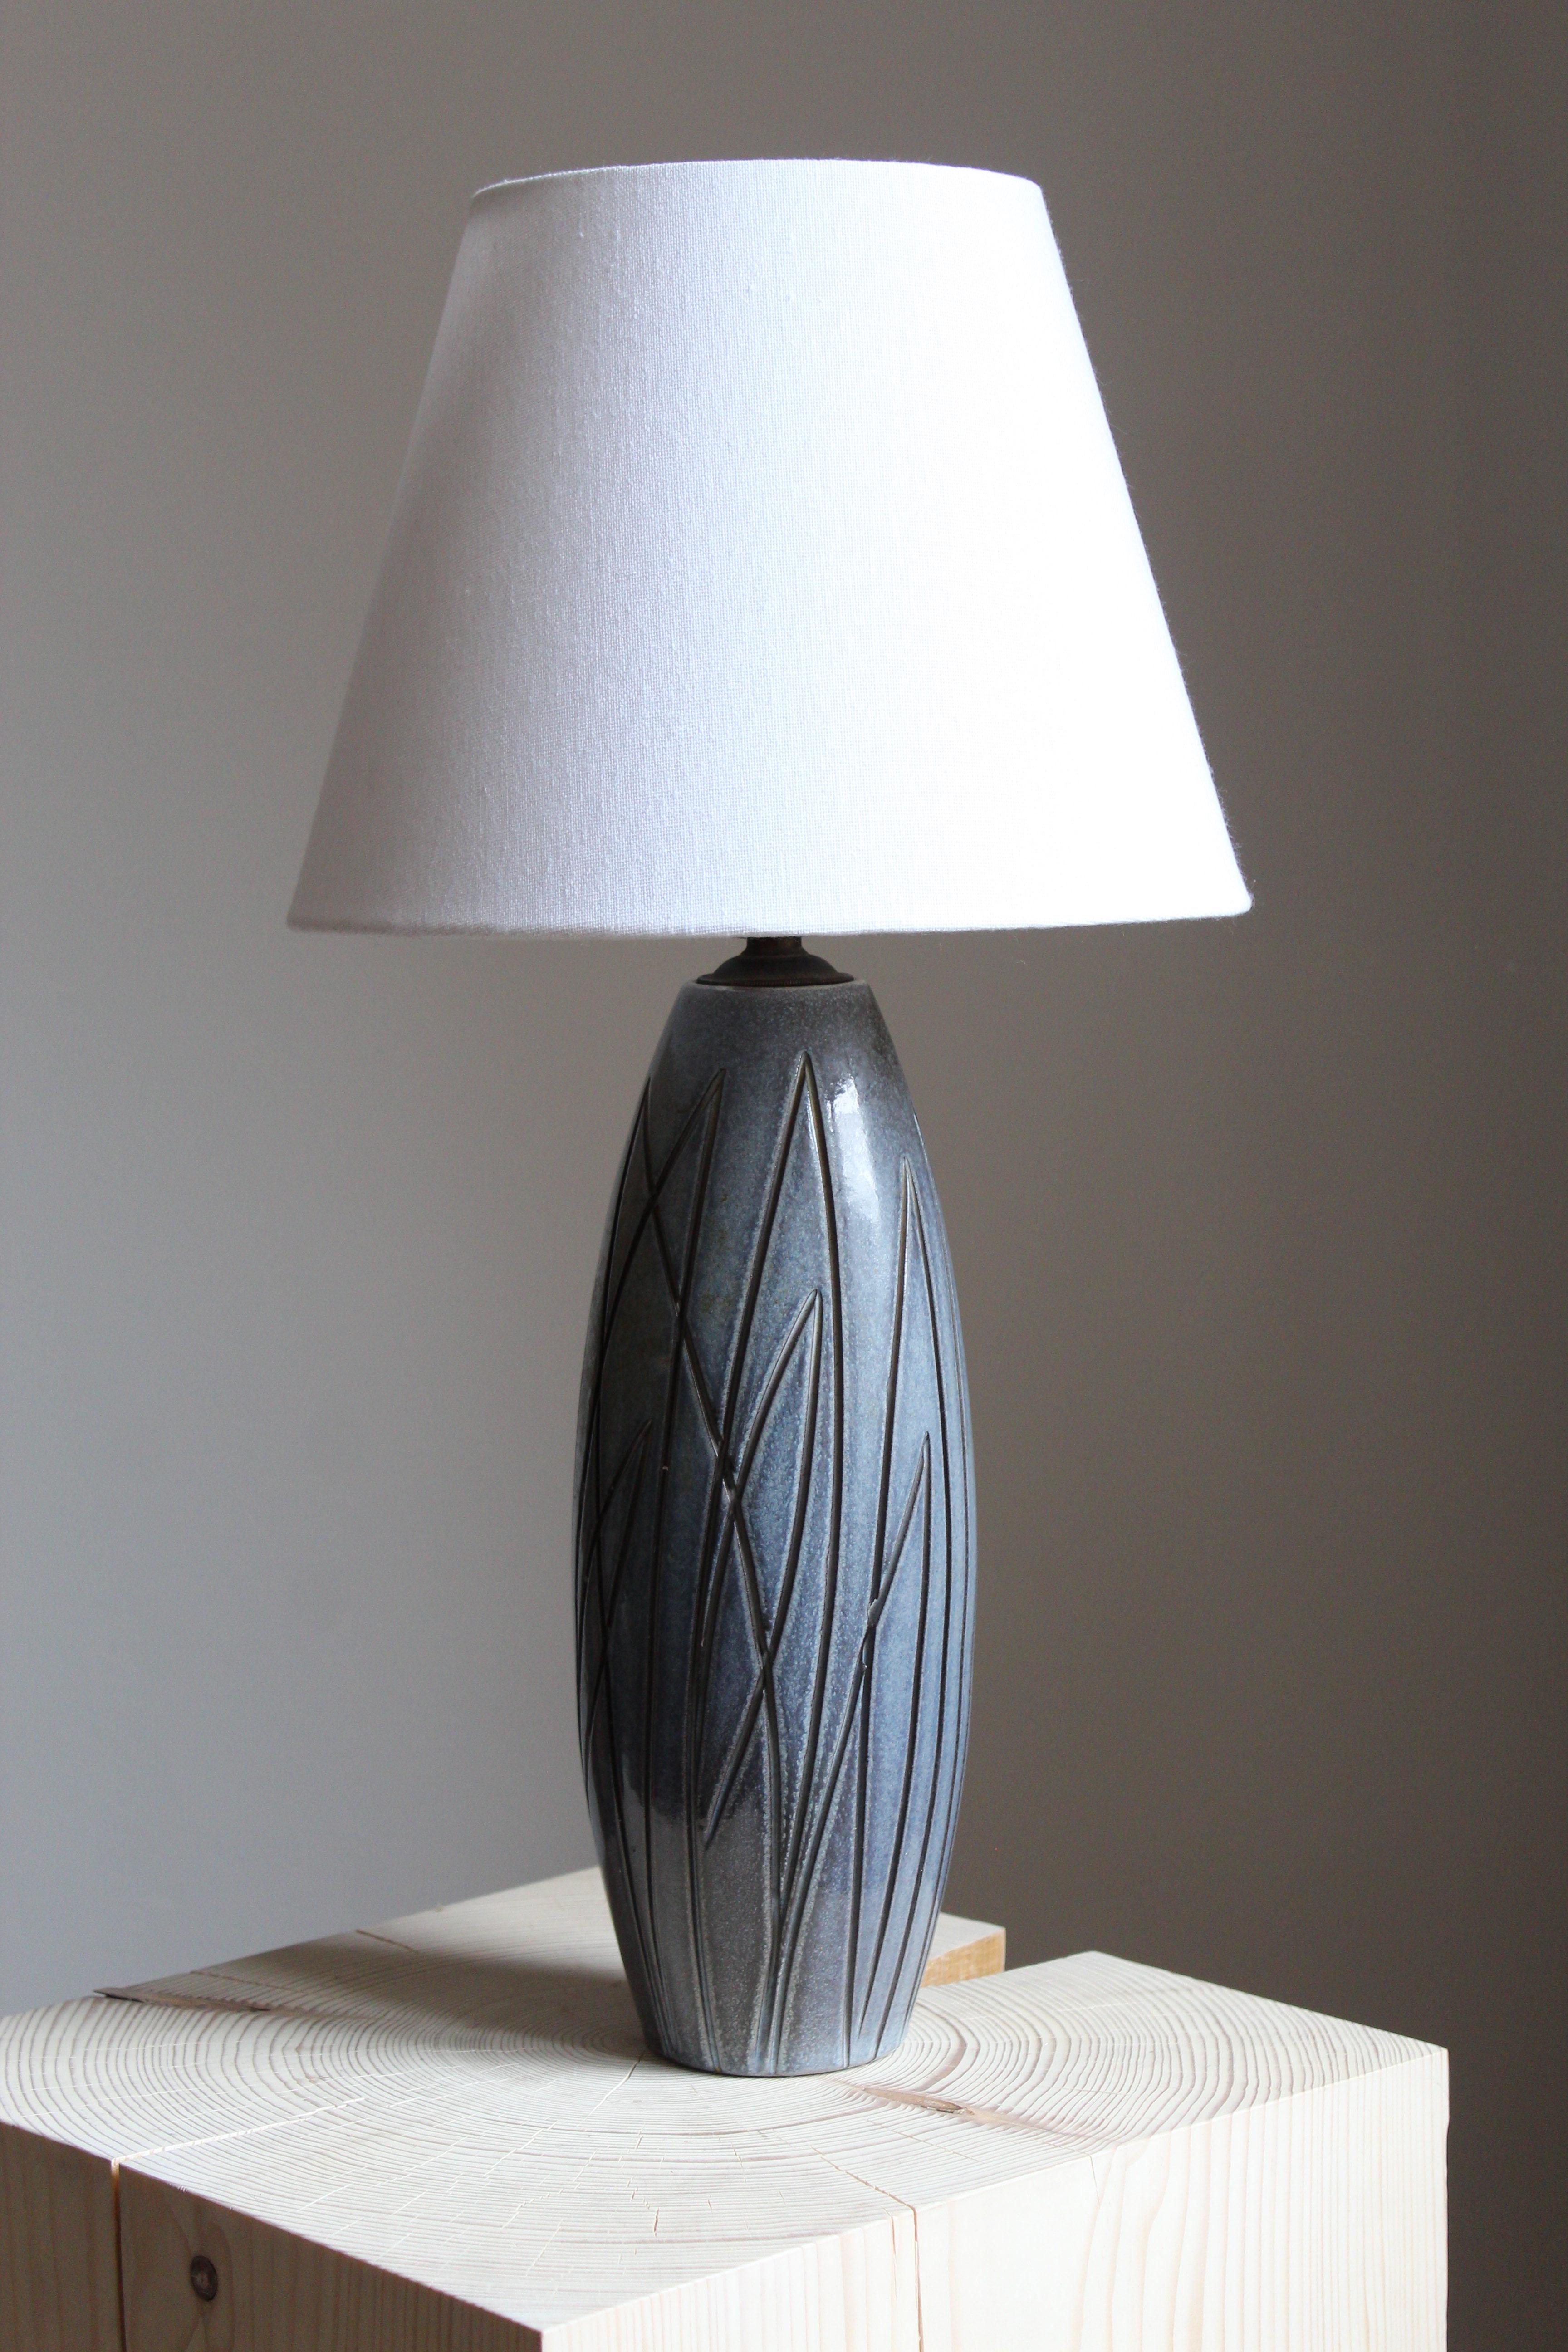 A table lamp, on a ceramic base designed by Ingrid Atterberg for Upsala Ekeby, Sweden, 1950s.

Glaze features a blue color.

Sold without lampshade. Stated dimensions exclude lampshade. Sold without lampshade.